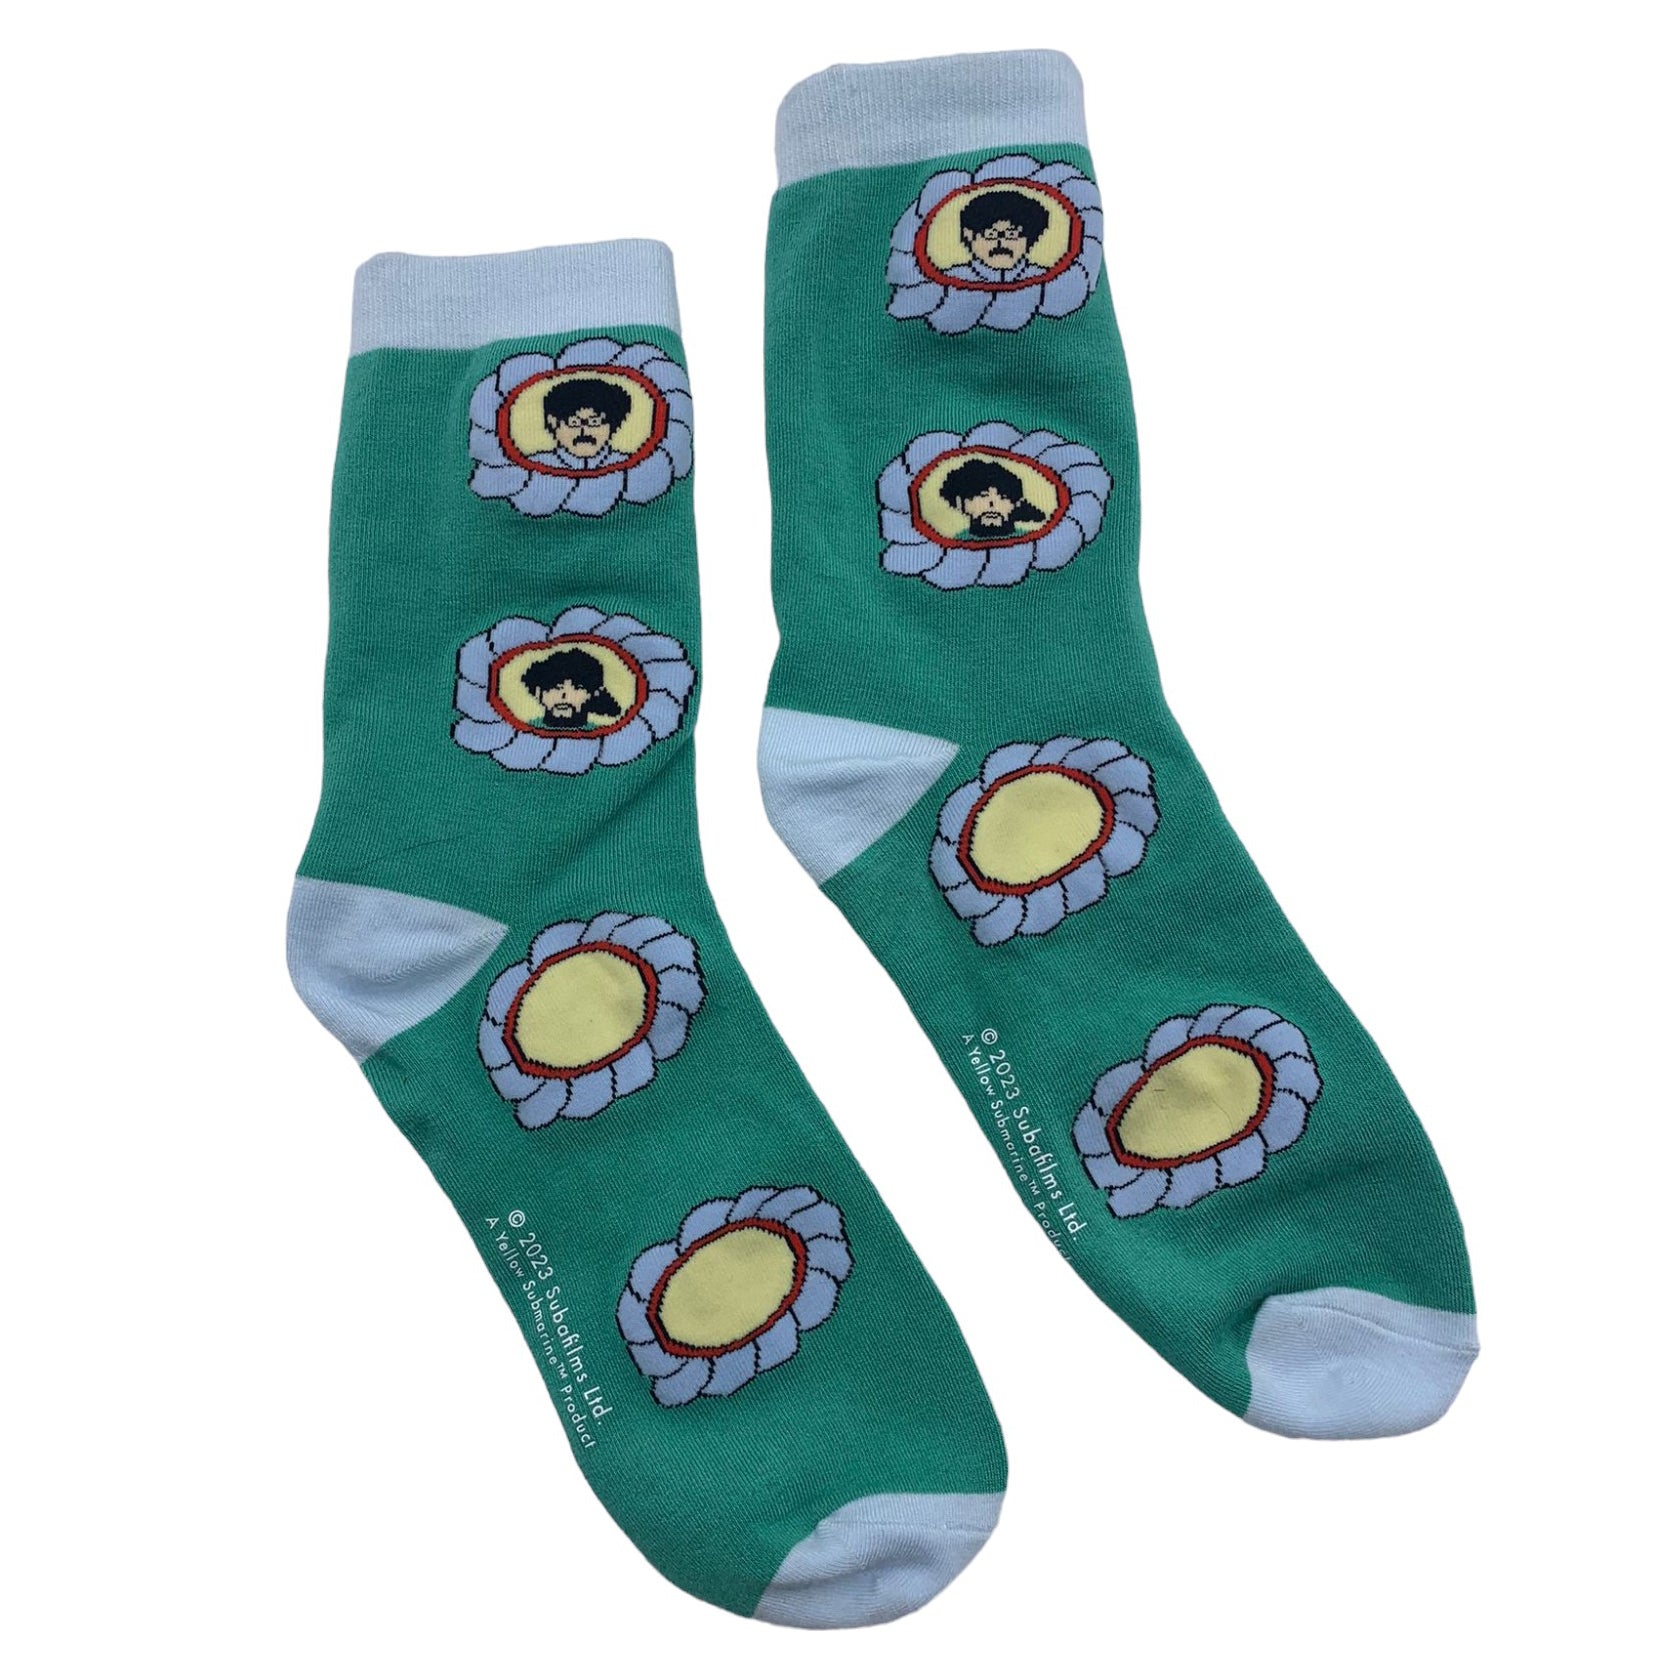 The Beatles Psychedelic Socks